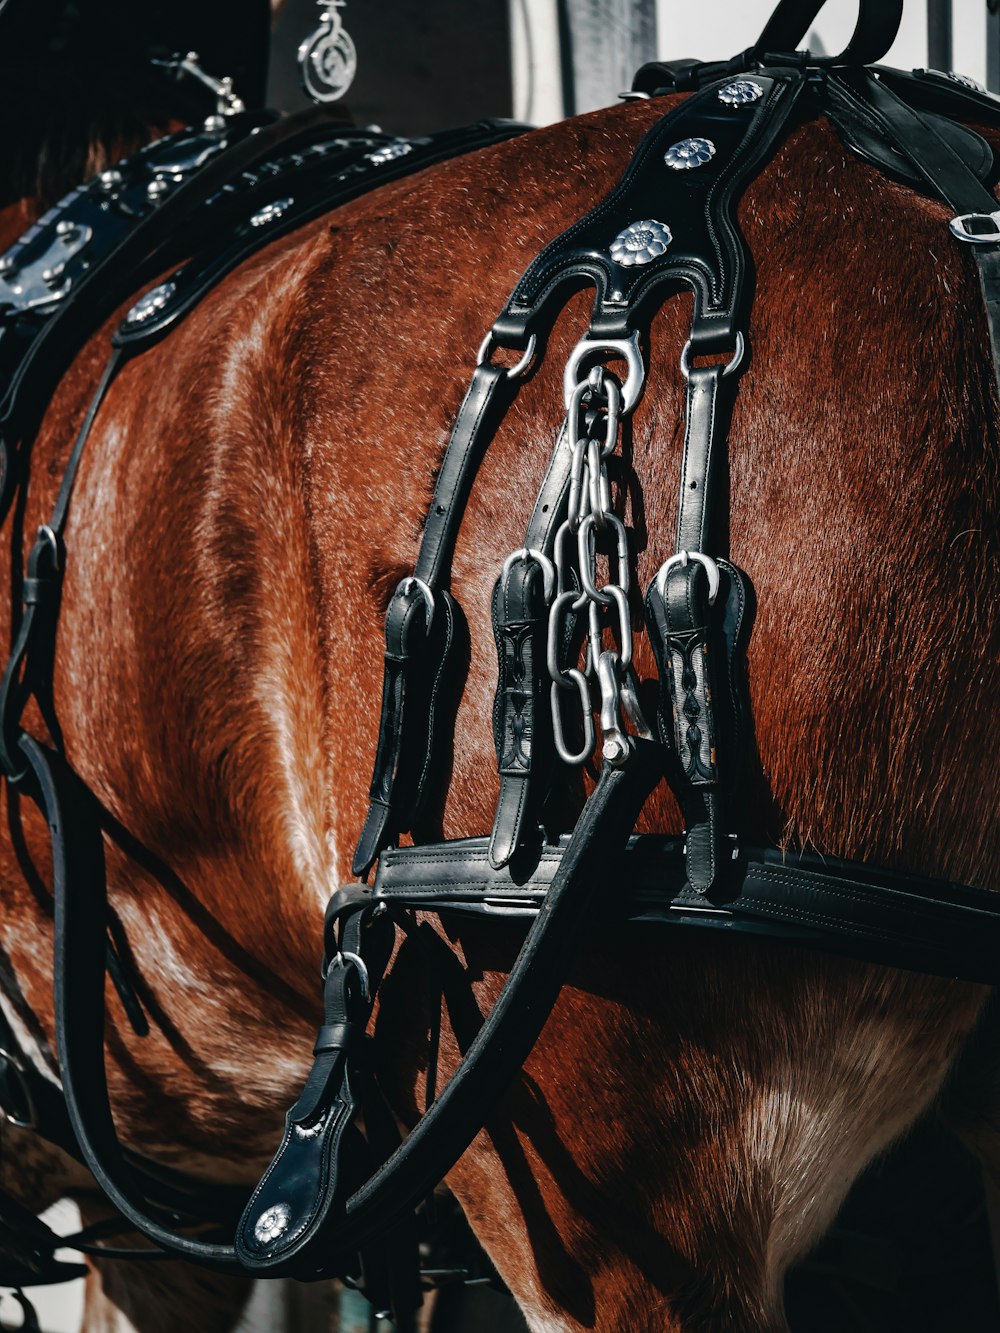 a close up of a horse's bridle and harness